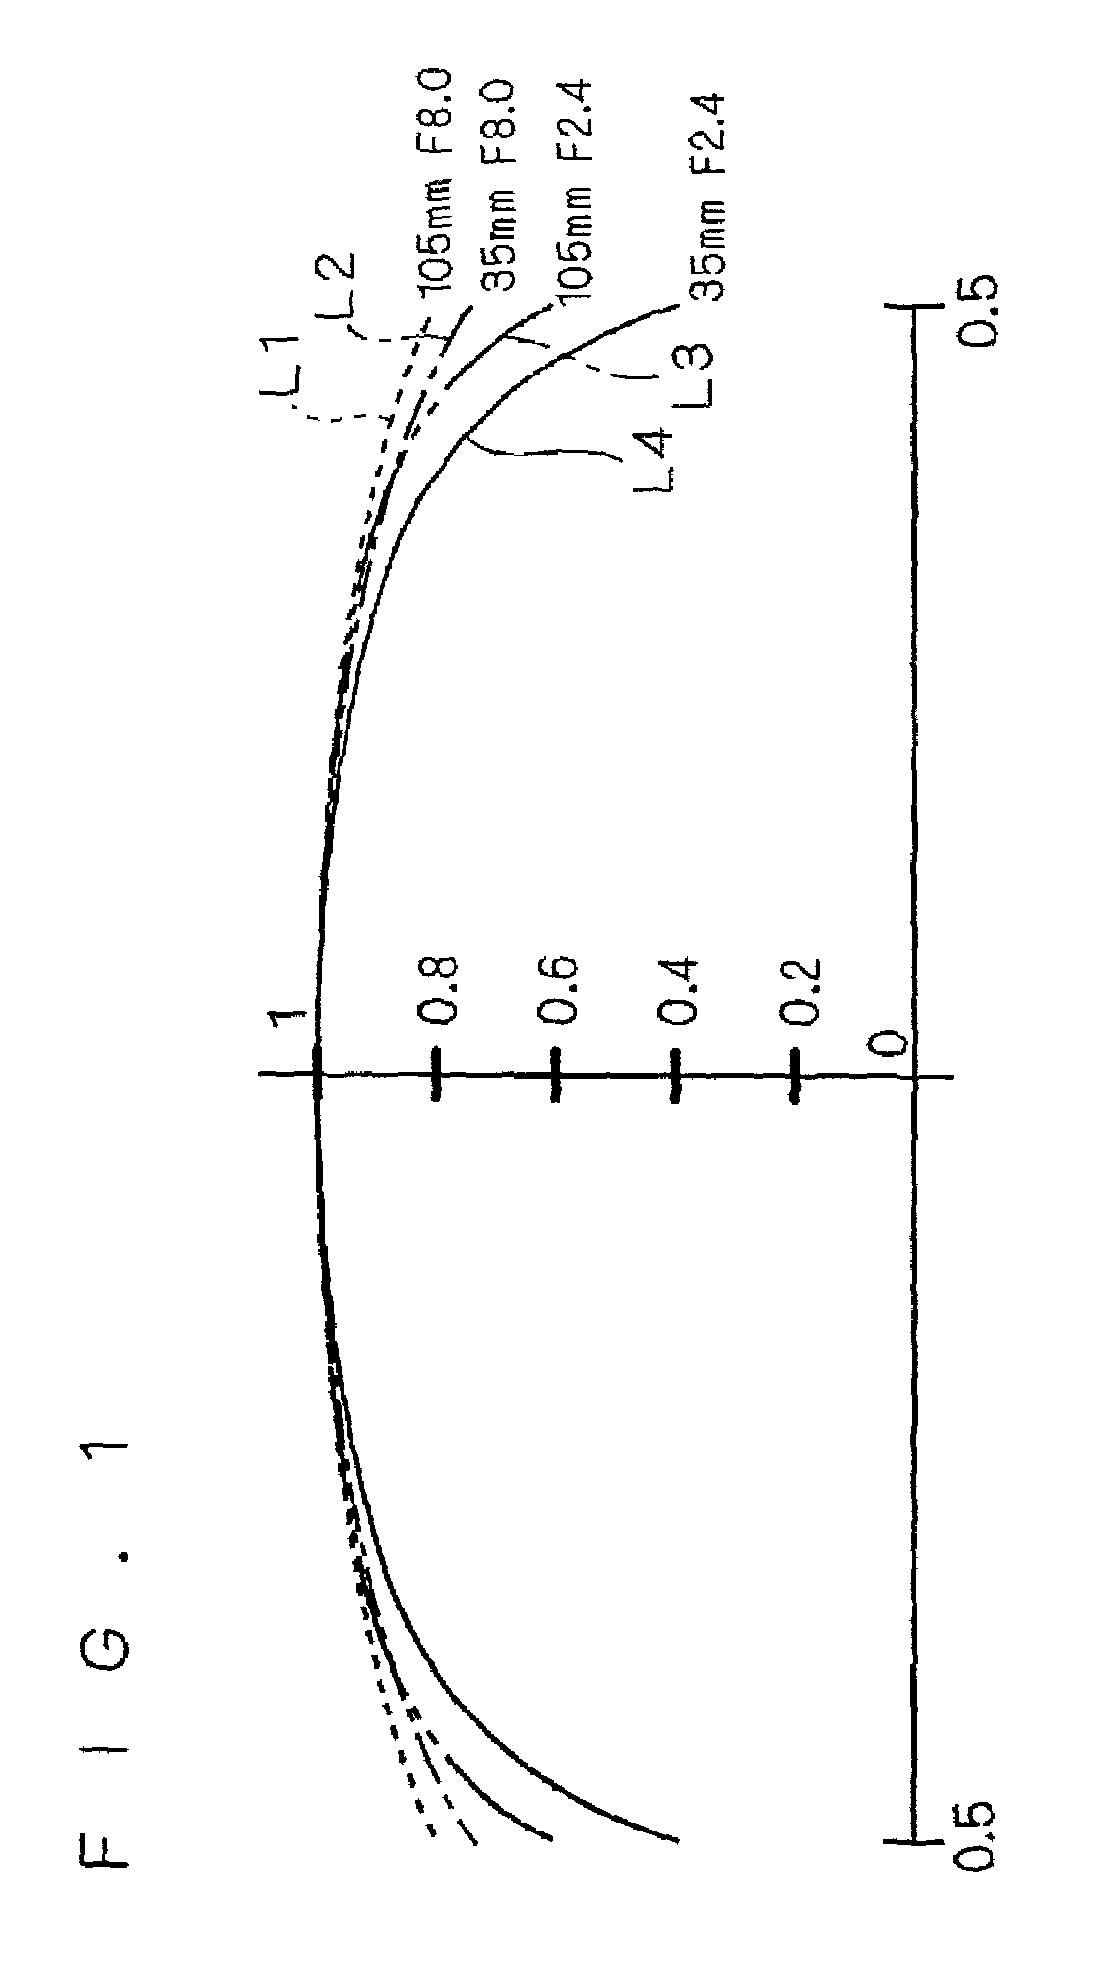 Image processing apparatus for performing shading correction on synthesized images